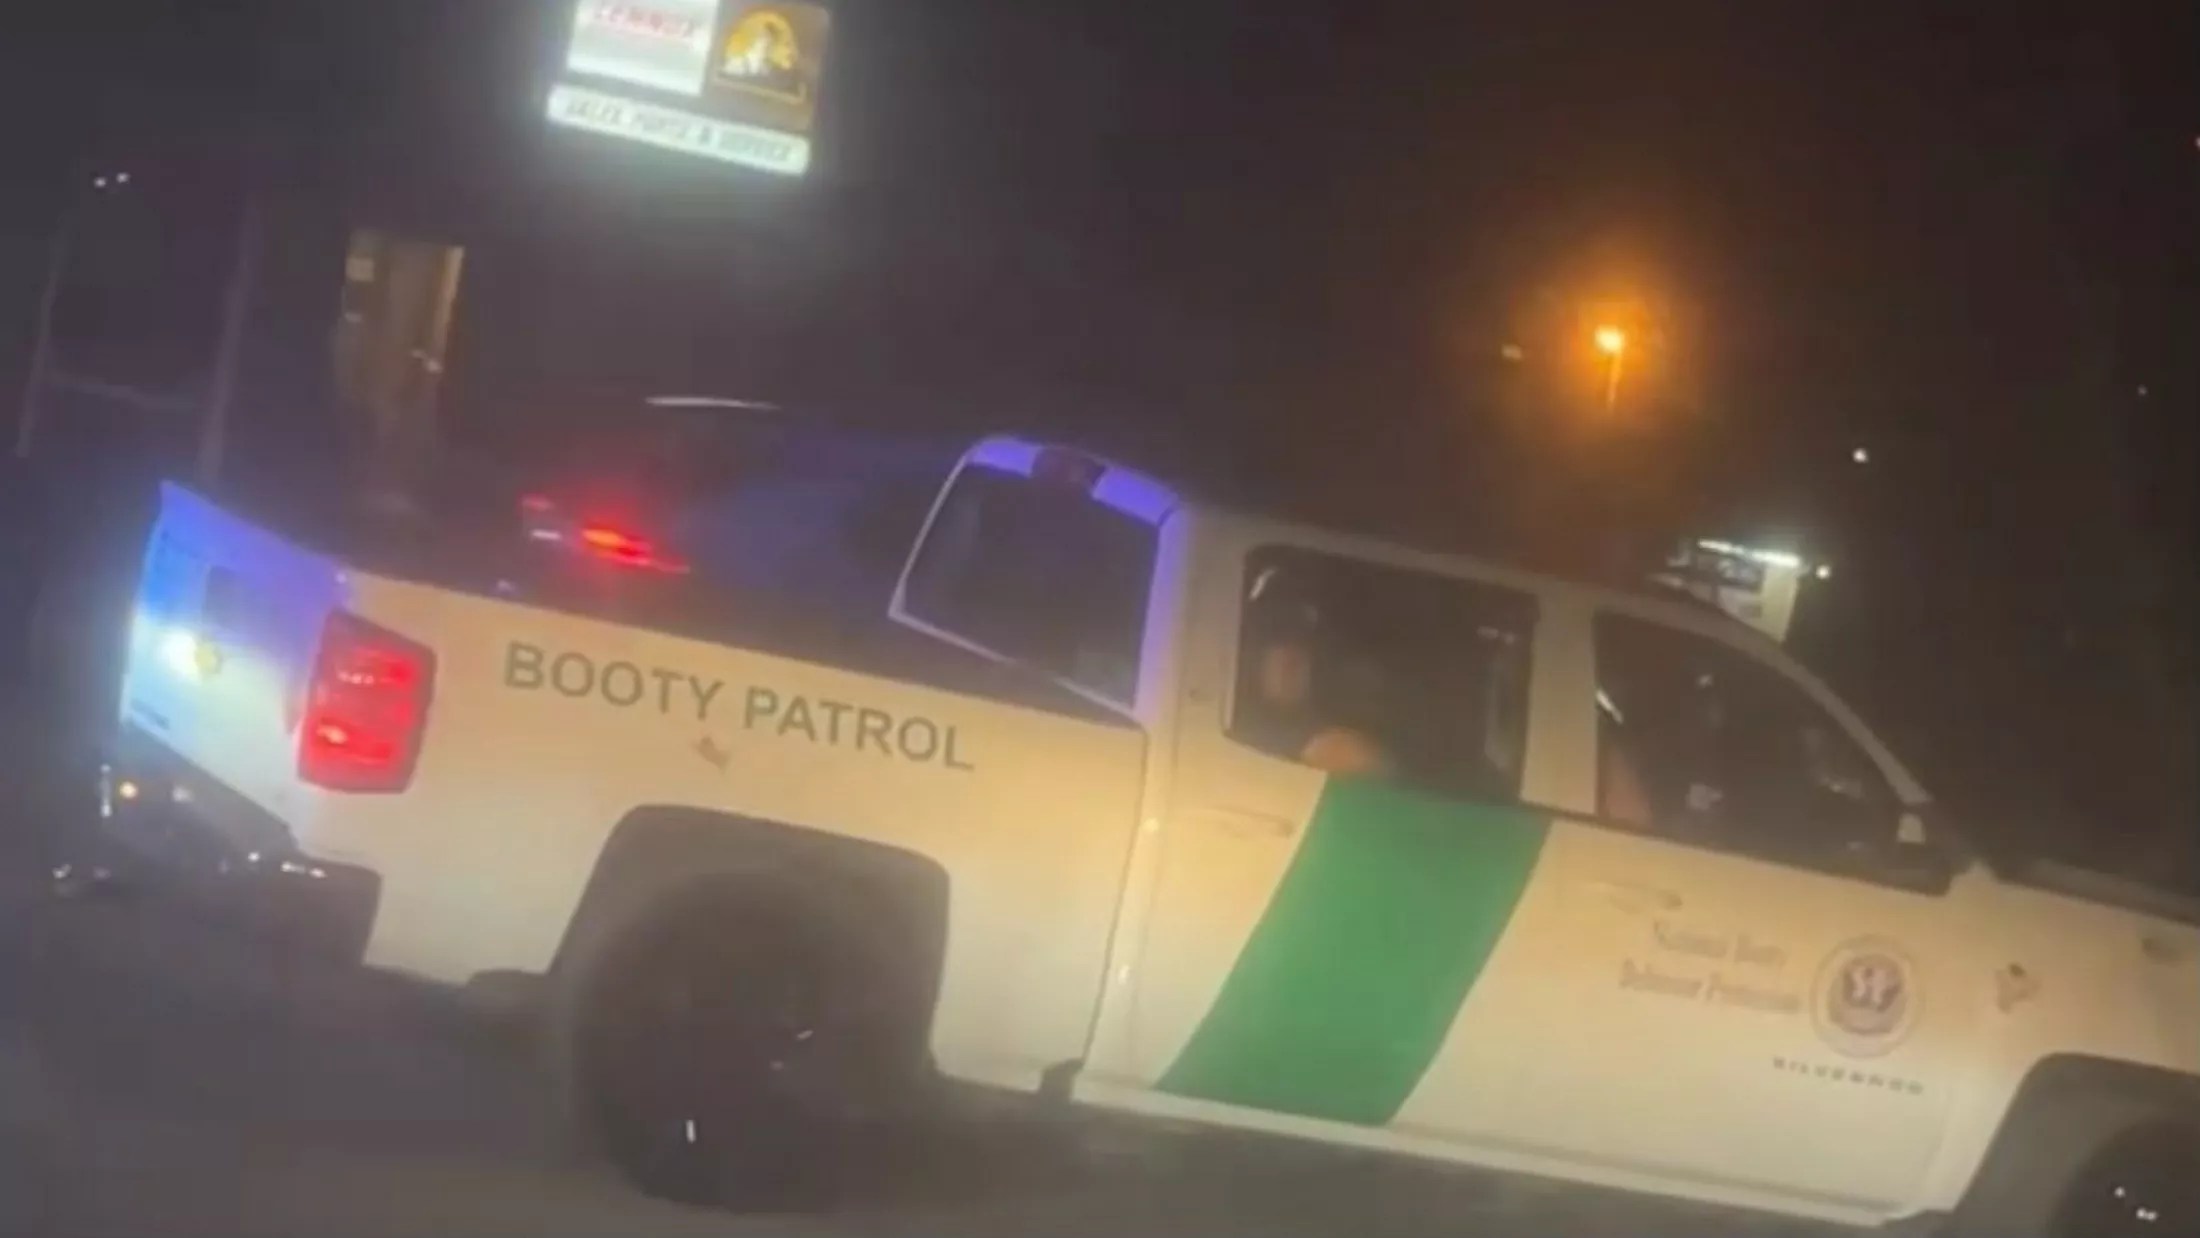 A white pickup truck with decals making it look like a Boarder Patrol agent but instead its says "Booty Patrol" on the side.